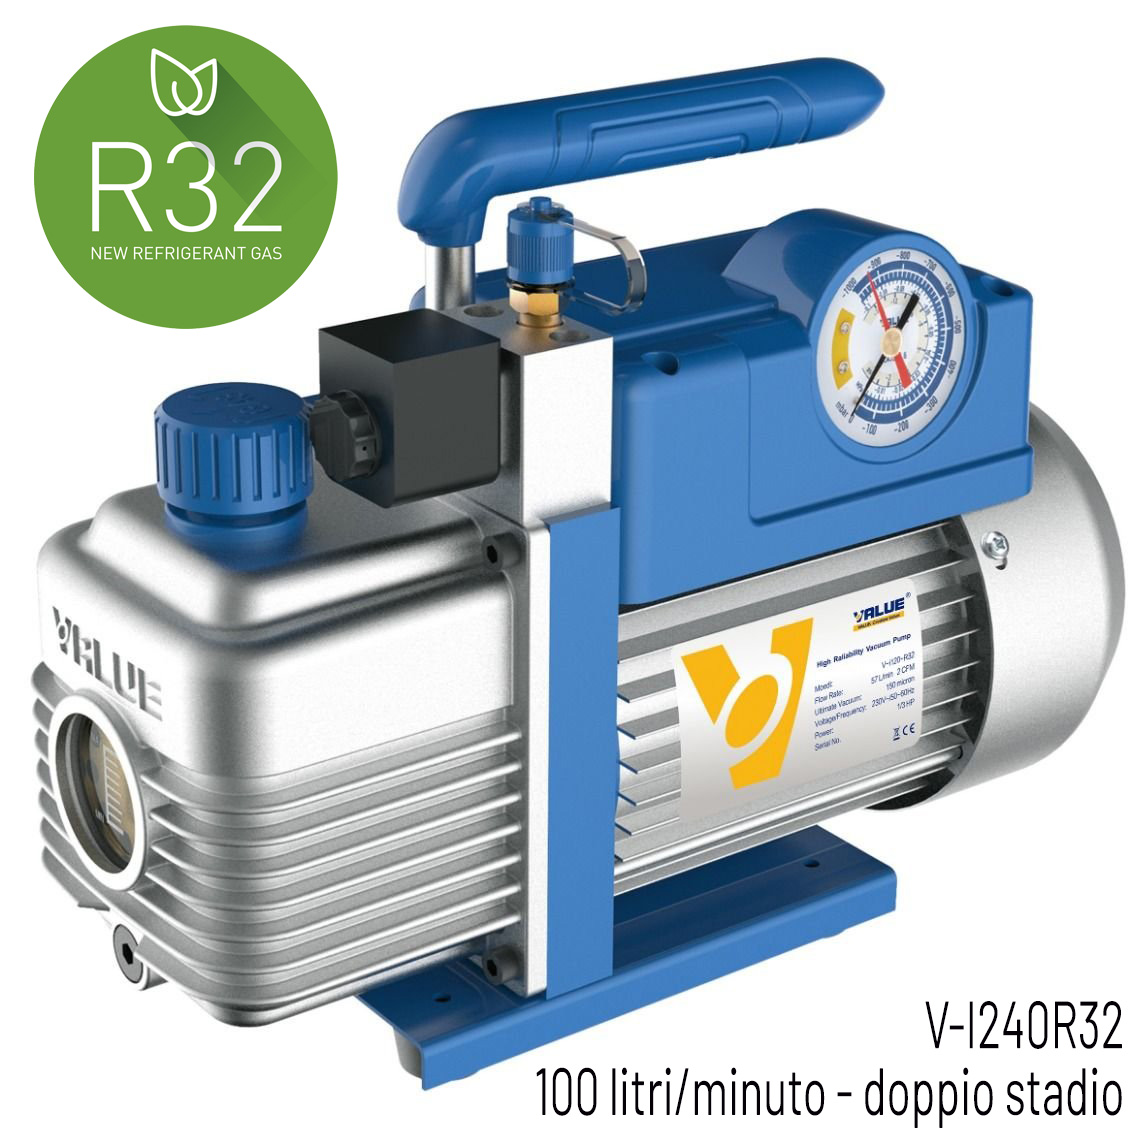 VALUE Vacuum pump, double stage, suitable for A2L, flow rate 100 litri/minute, motor 1/2 HP, vacuum rate  2 x10(-2) mbar - 0,02 mbar/2 Pa/15 micron - with solenoid valve and vacuum gauge